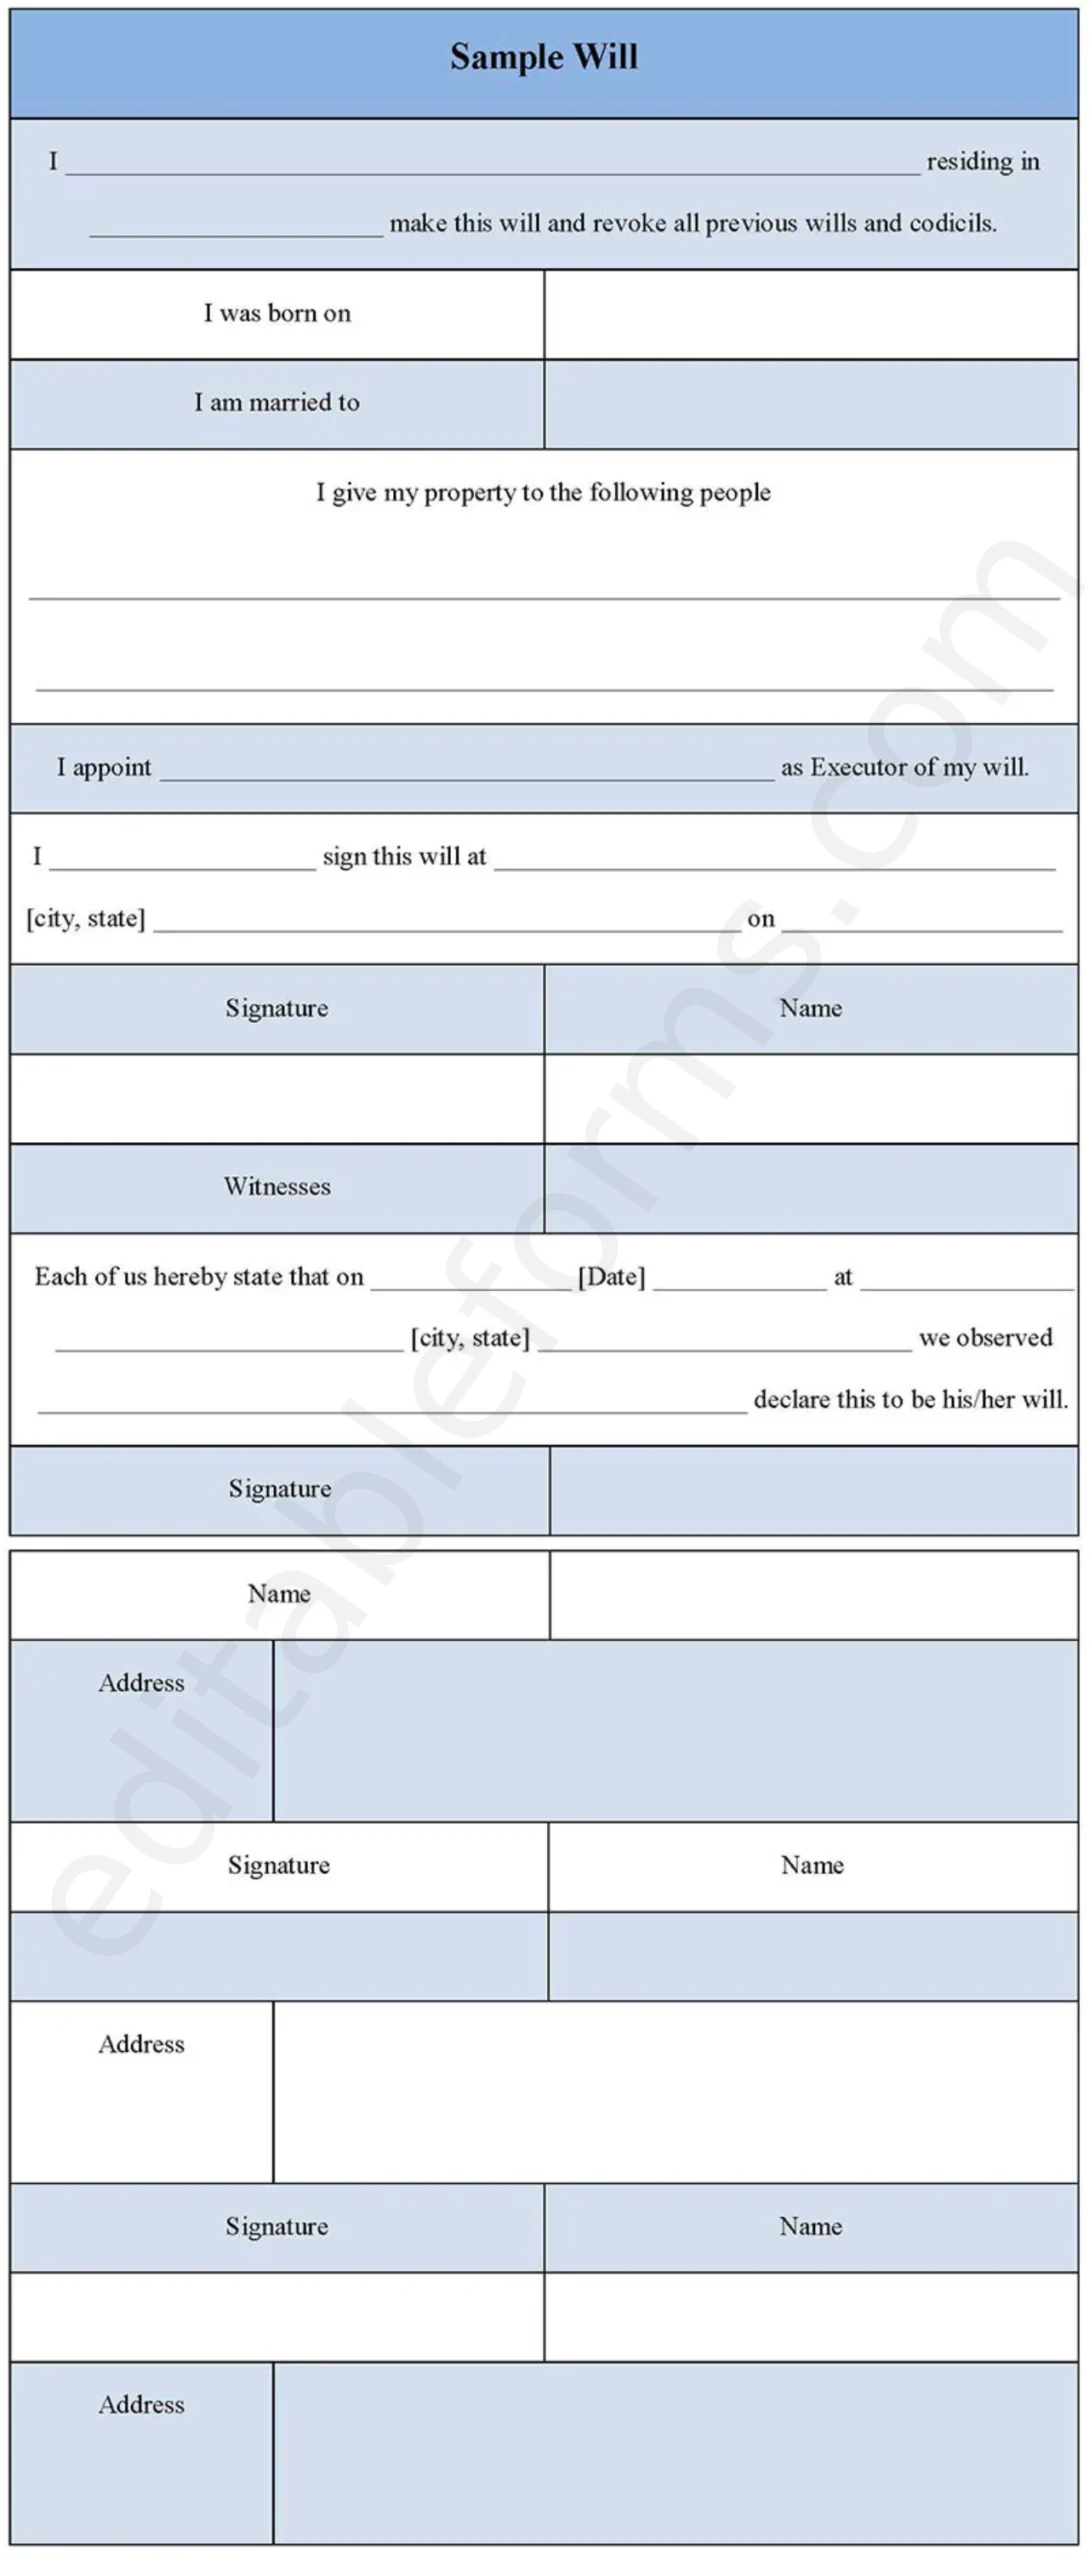 Sample Will Fillable PDF Template